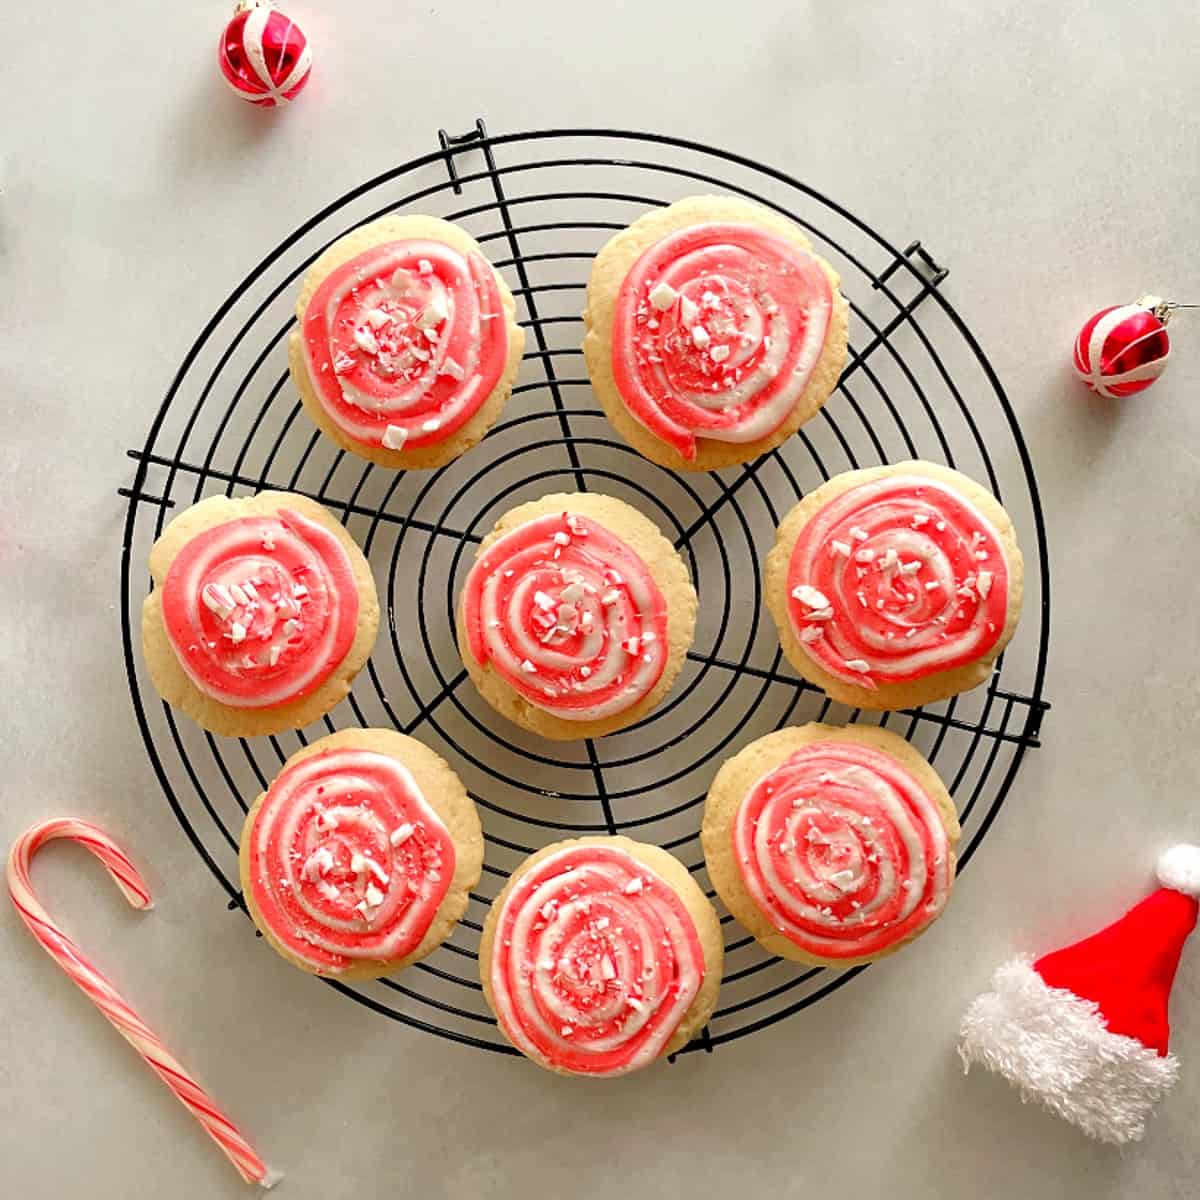 candy cane cookies with peppermint frosting.